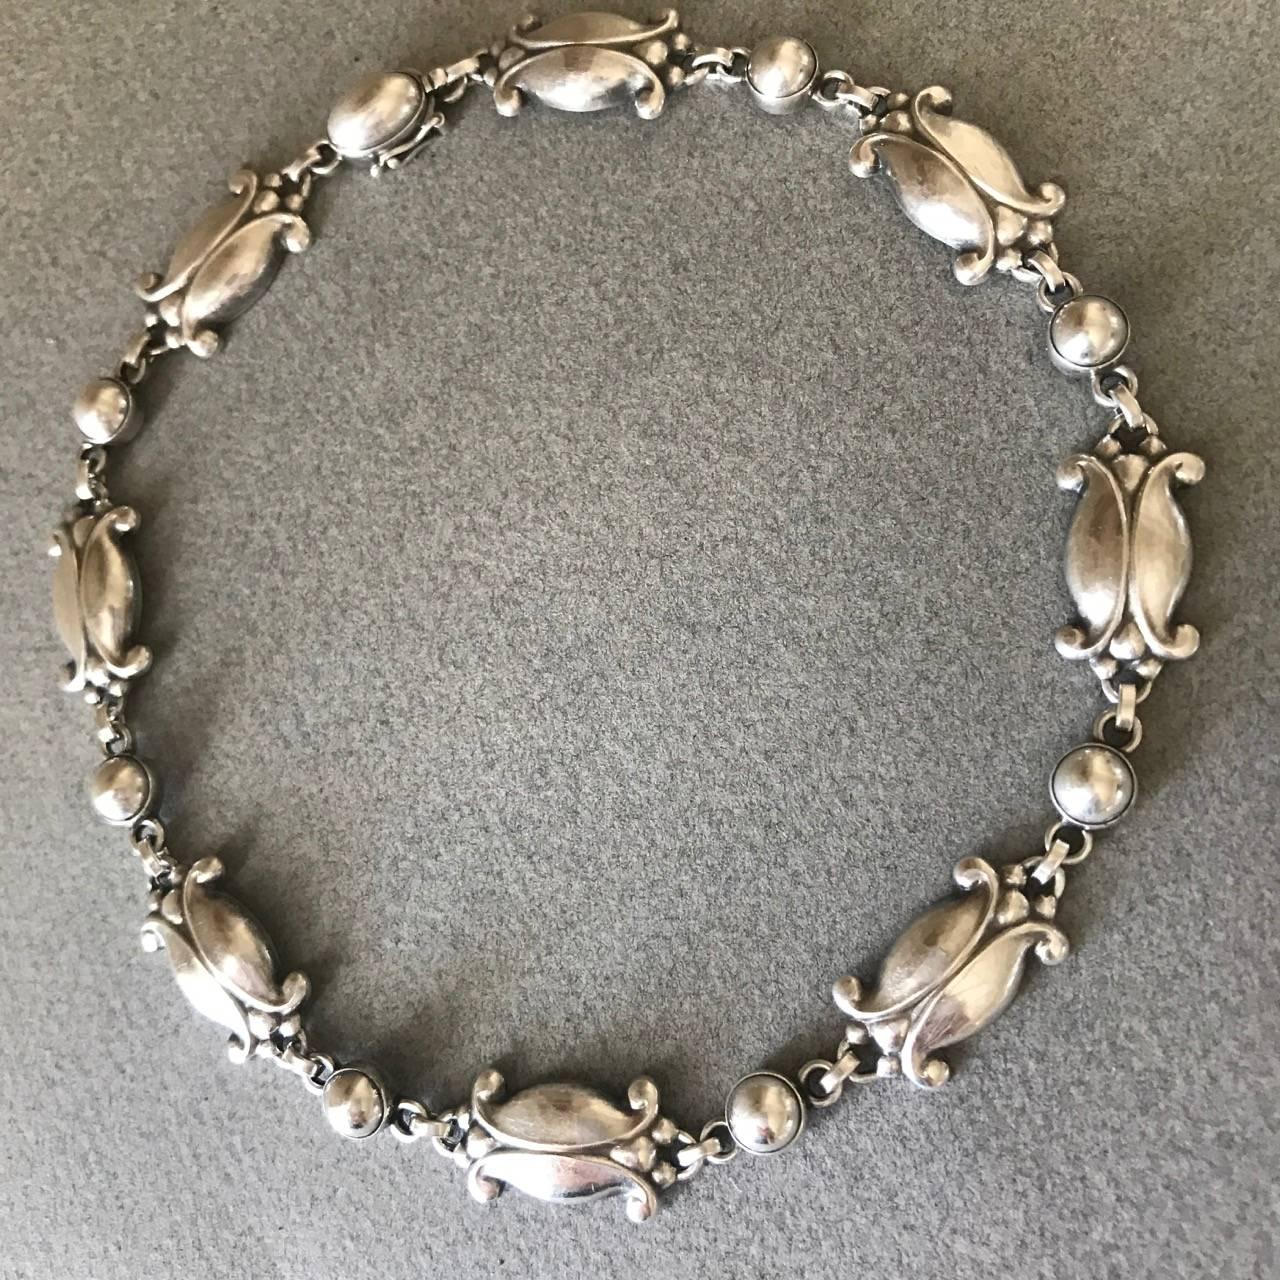 Georg Jensen Sterling SIlver Necklace, No. 15

This is a gorgeous example of a necklace that can be worn day or evening. Beautiful patina on the sterling silver. The links have visible hand hammering.

This design is in current production under the